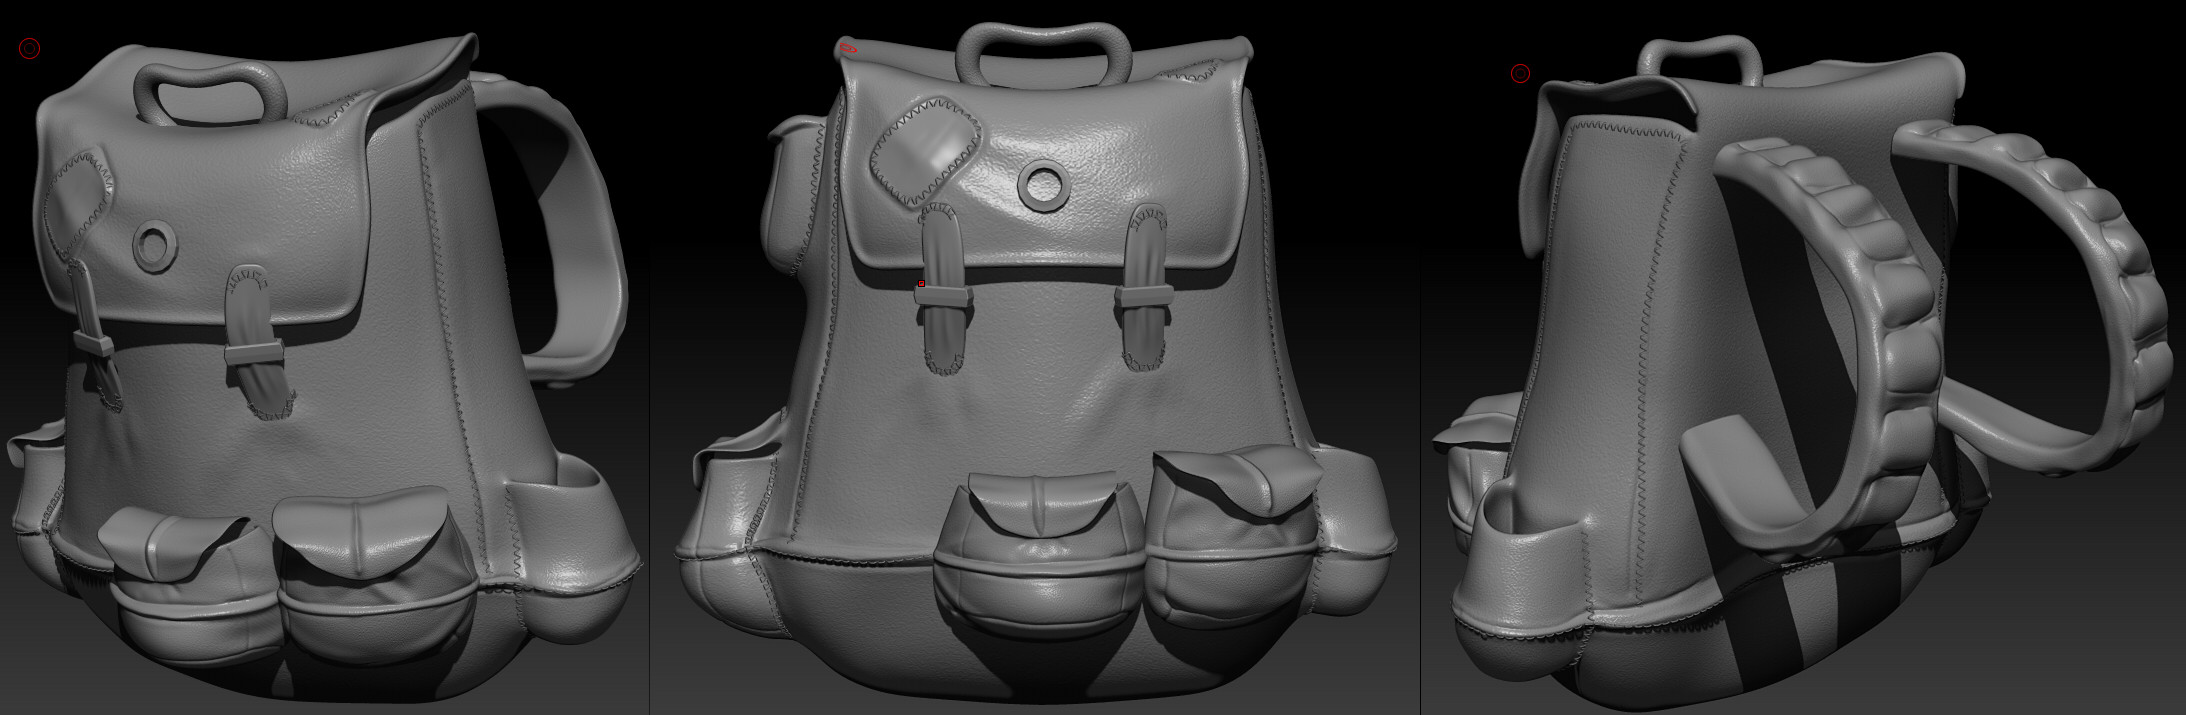 Since the props were an important part of the character and I was on a limited schedule, I worked on them at the same time as the character.  The bag was my favorite part of the piece, as it gave me the opportunity to sculpt a bunch of minute details.